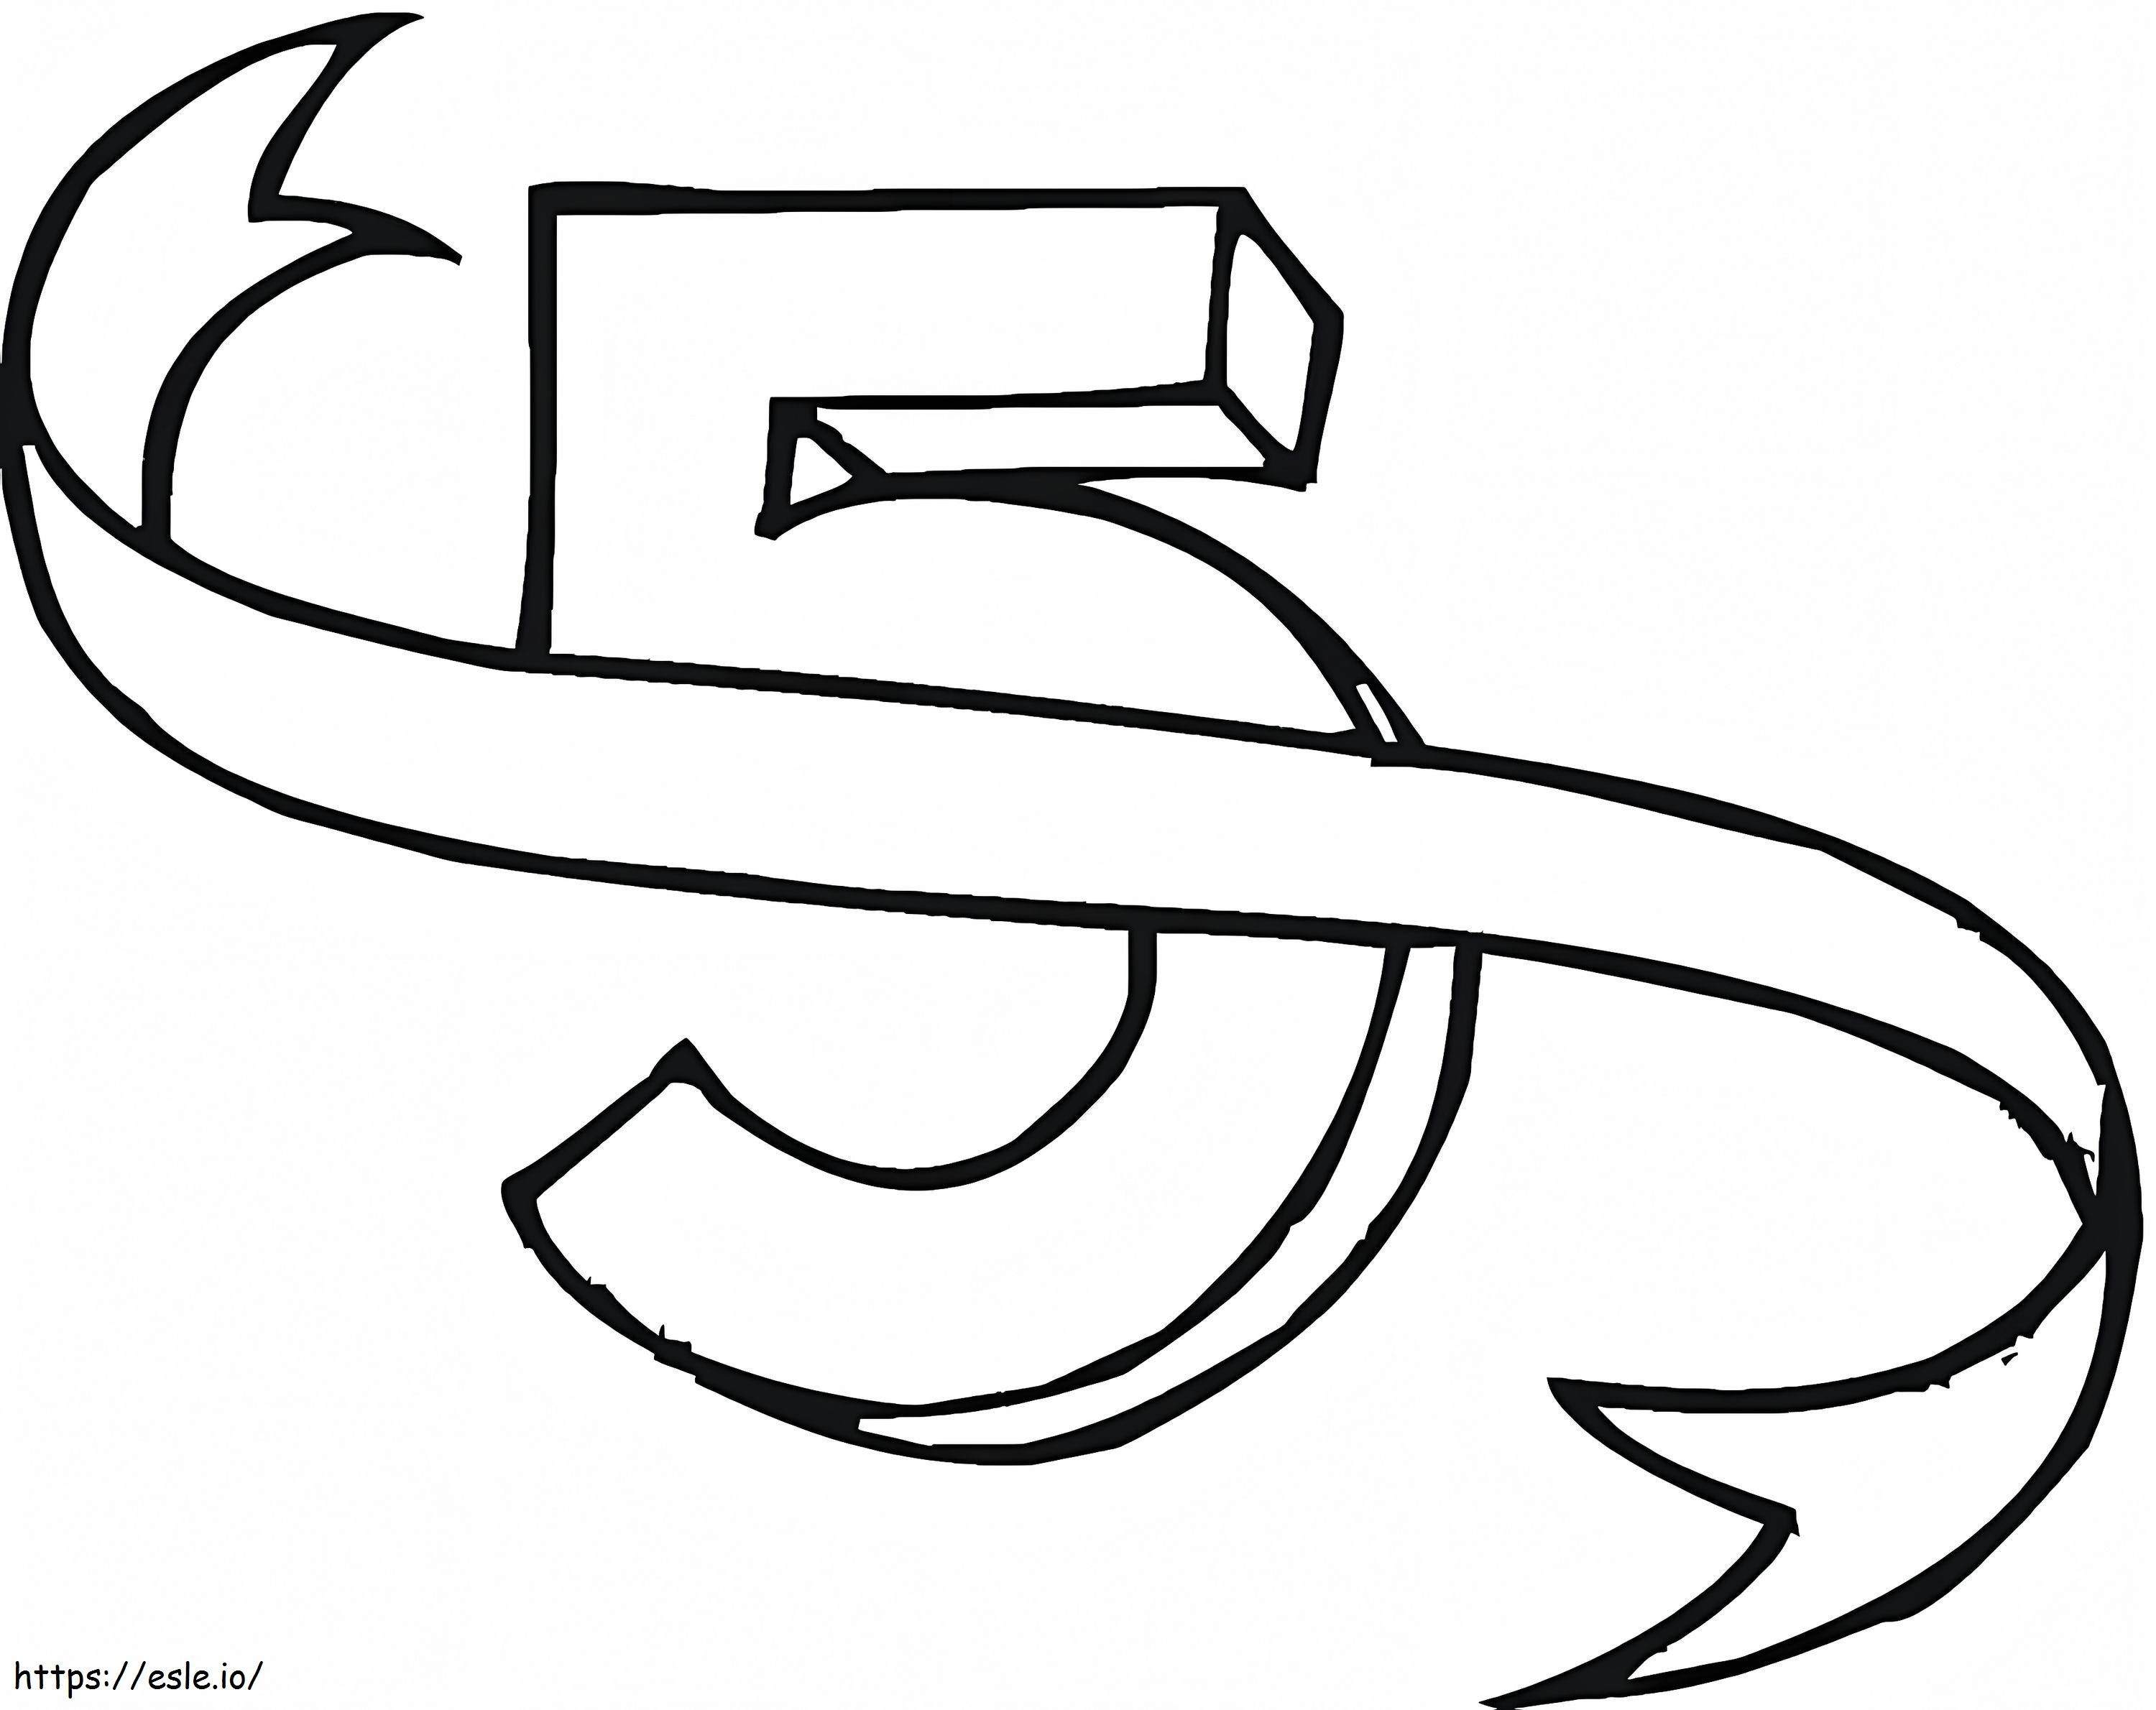 Ribbon Number 5 coloring page